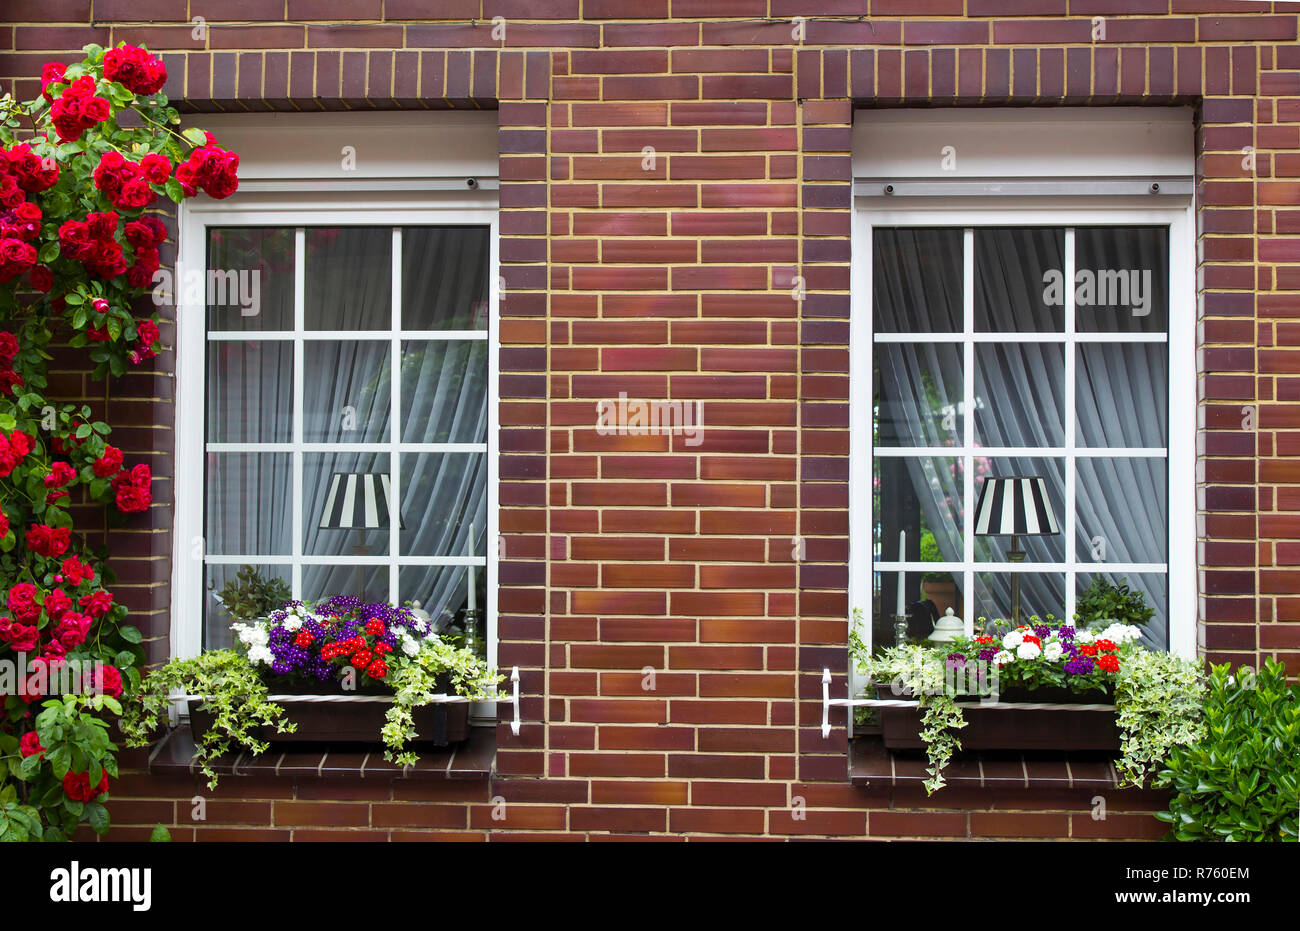 brick wall with windows and flower boxes with flowering plants Stock Photo